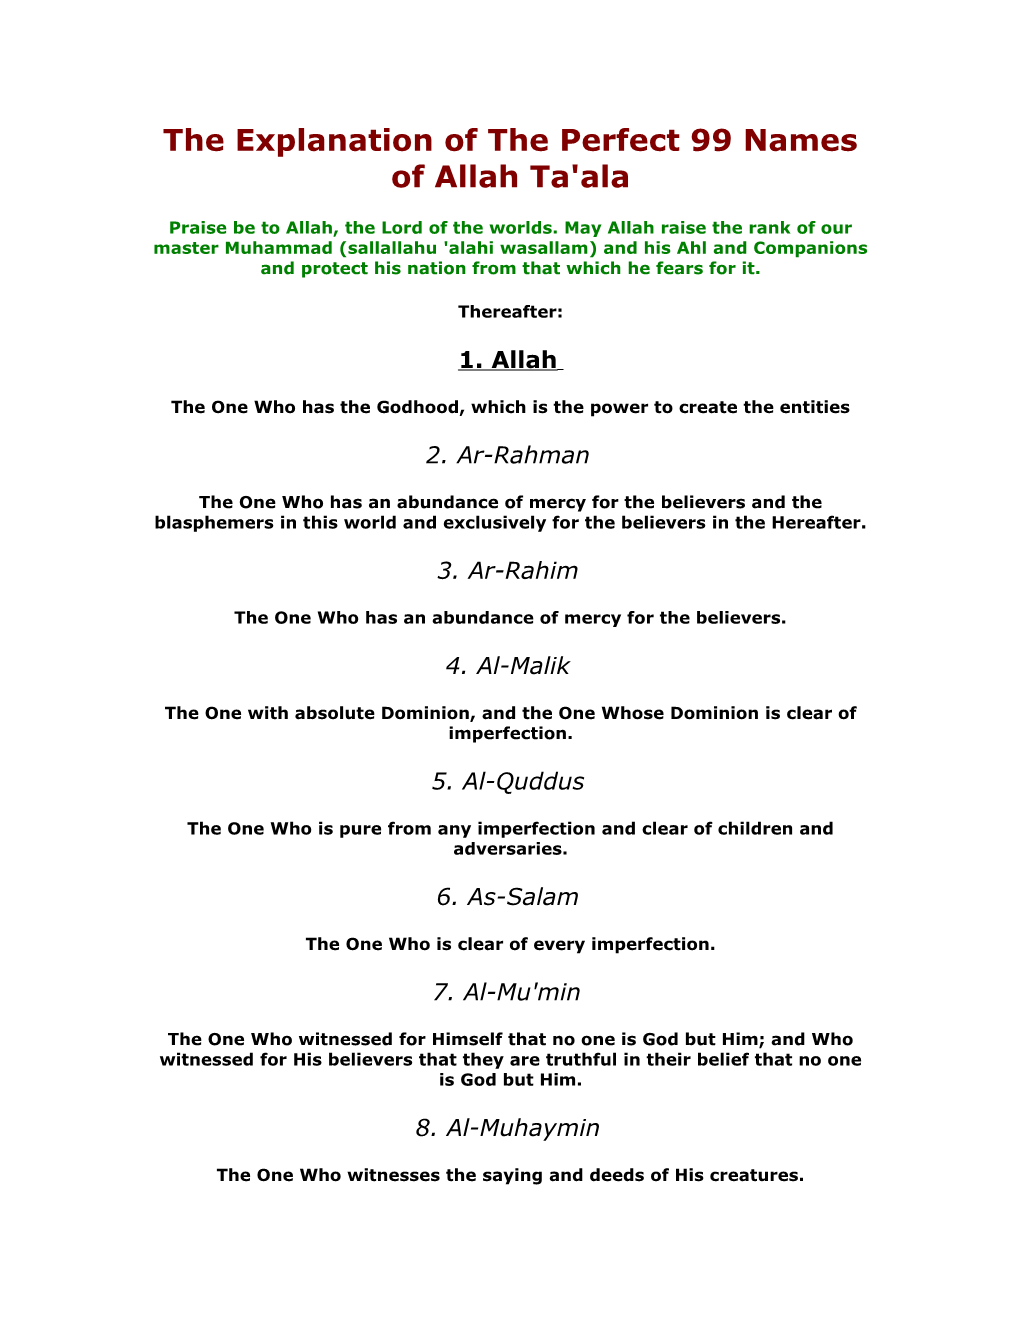 The Explanation of the Perfect 99 Names of Allah Ta'ala